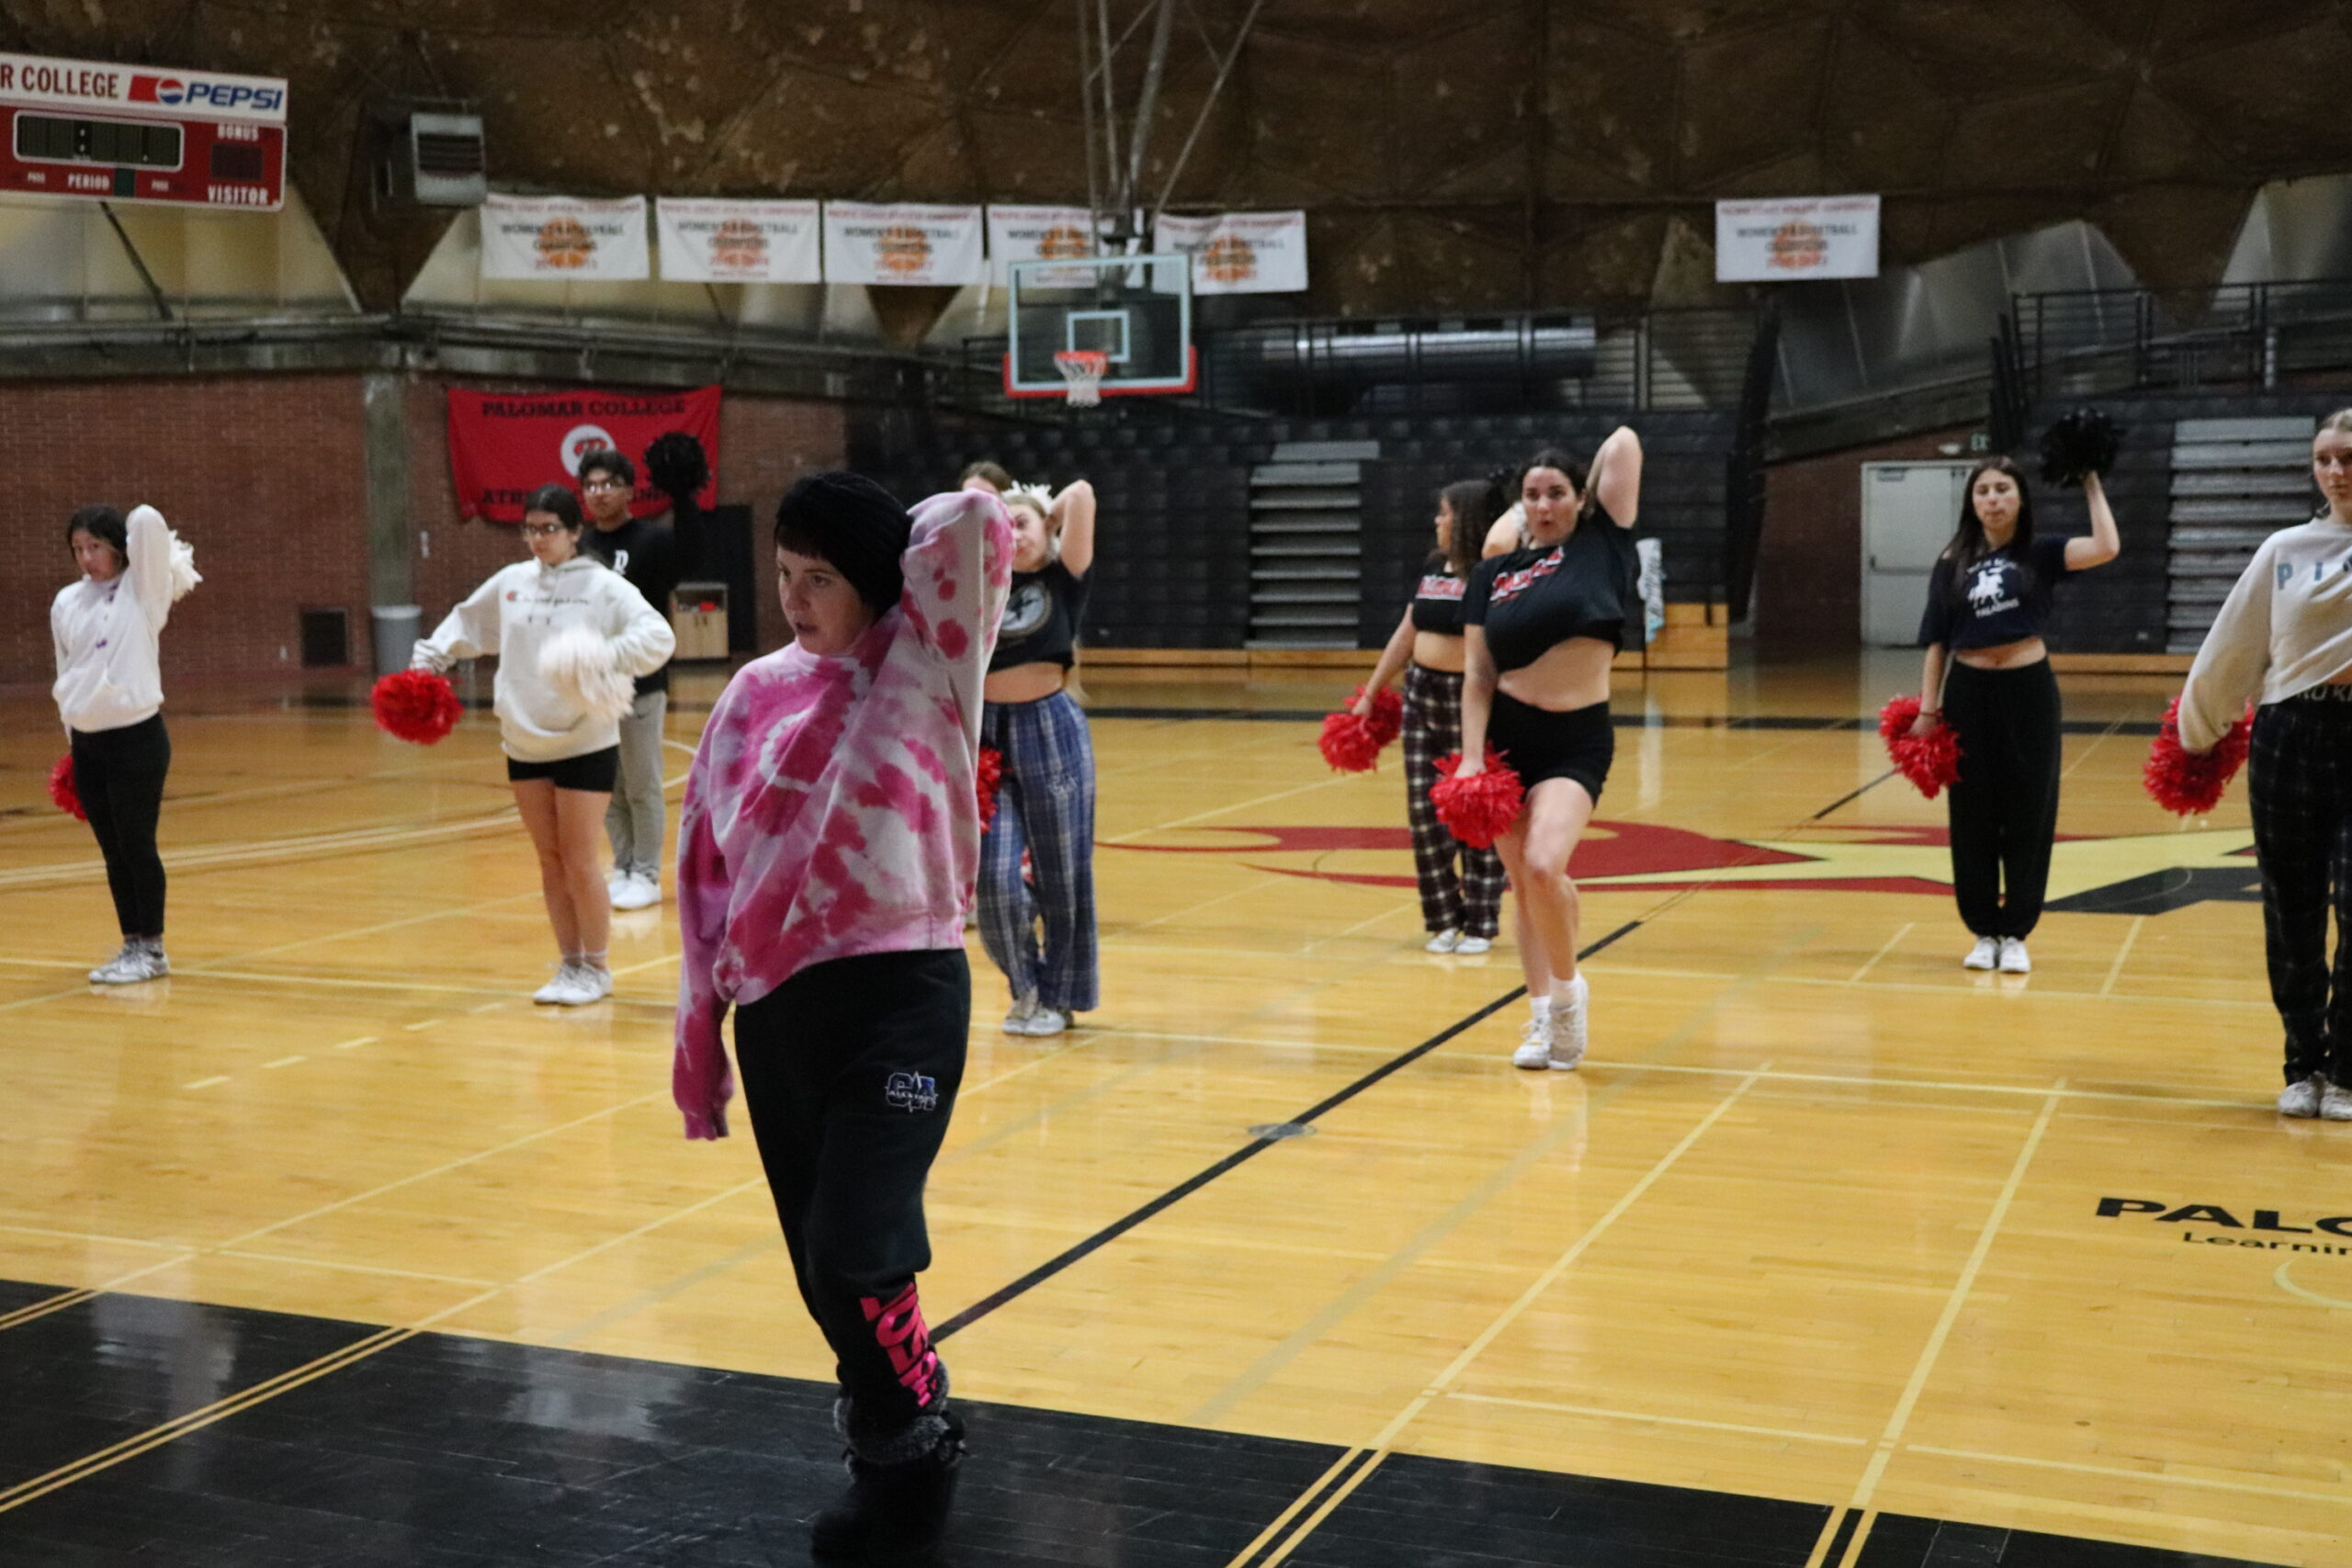 The Palomar Cheer coach, Coach Reed, stands in front of her team, showing them how to perform a new routine inside the Dome on the Palomar San Marcos campus. She's wearing a black beanie, pink tie dye seater, and black sweatpants.